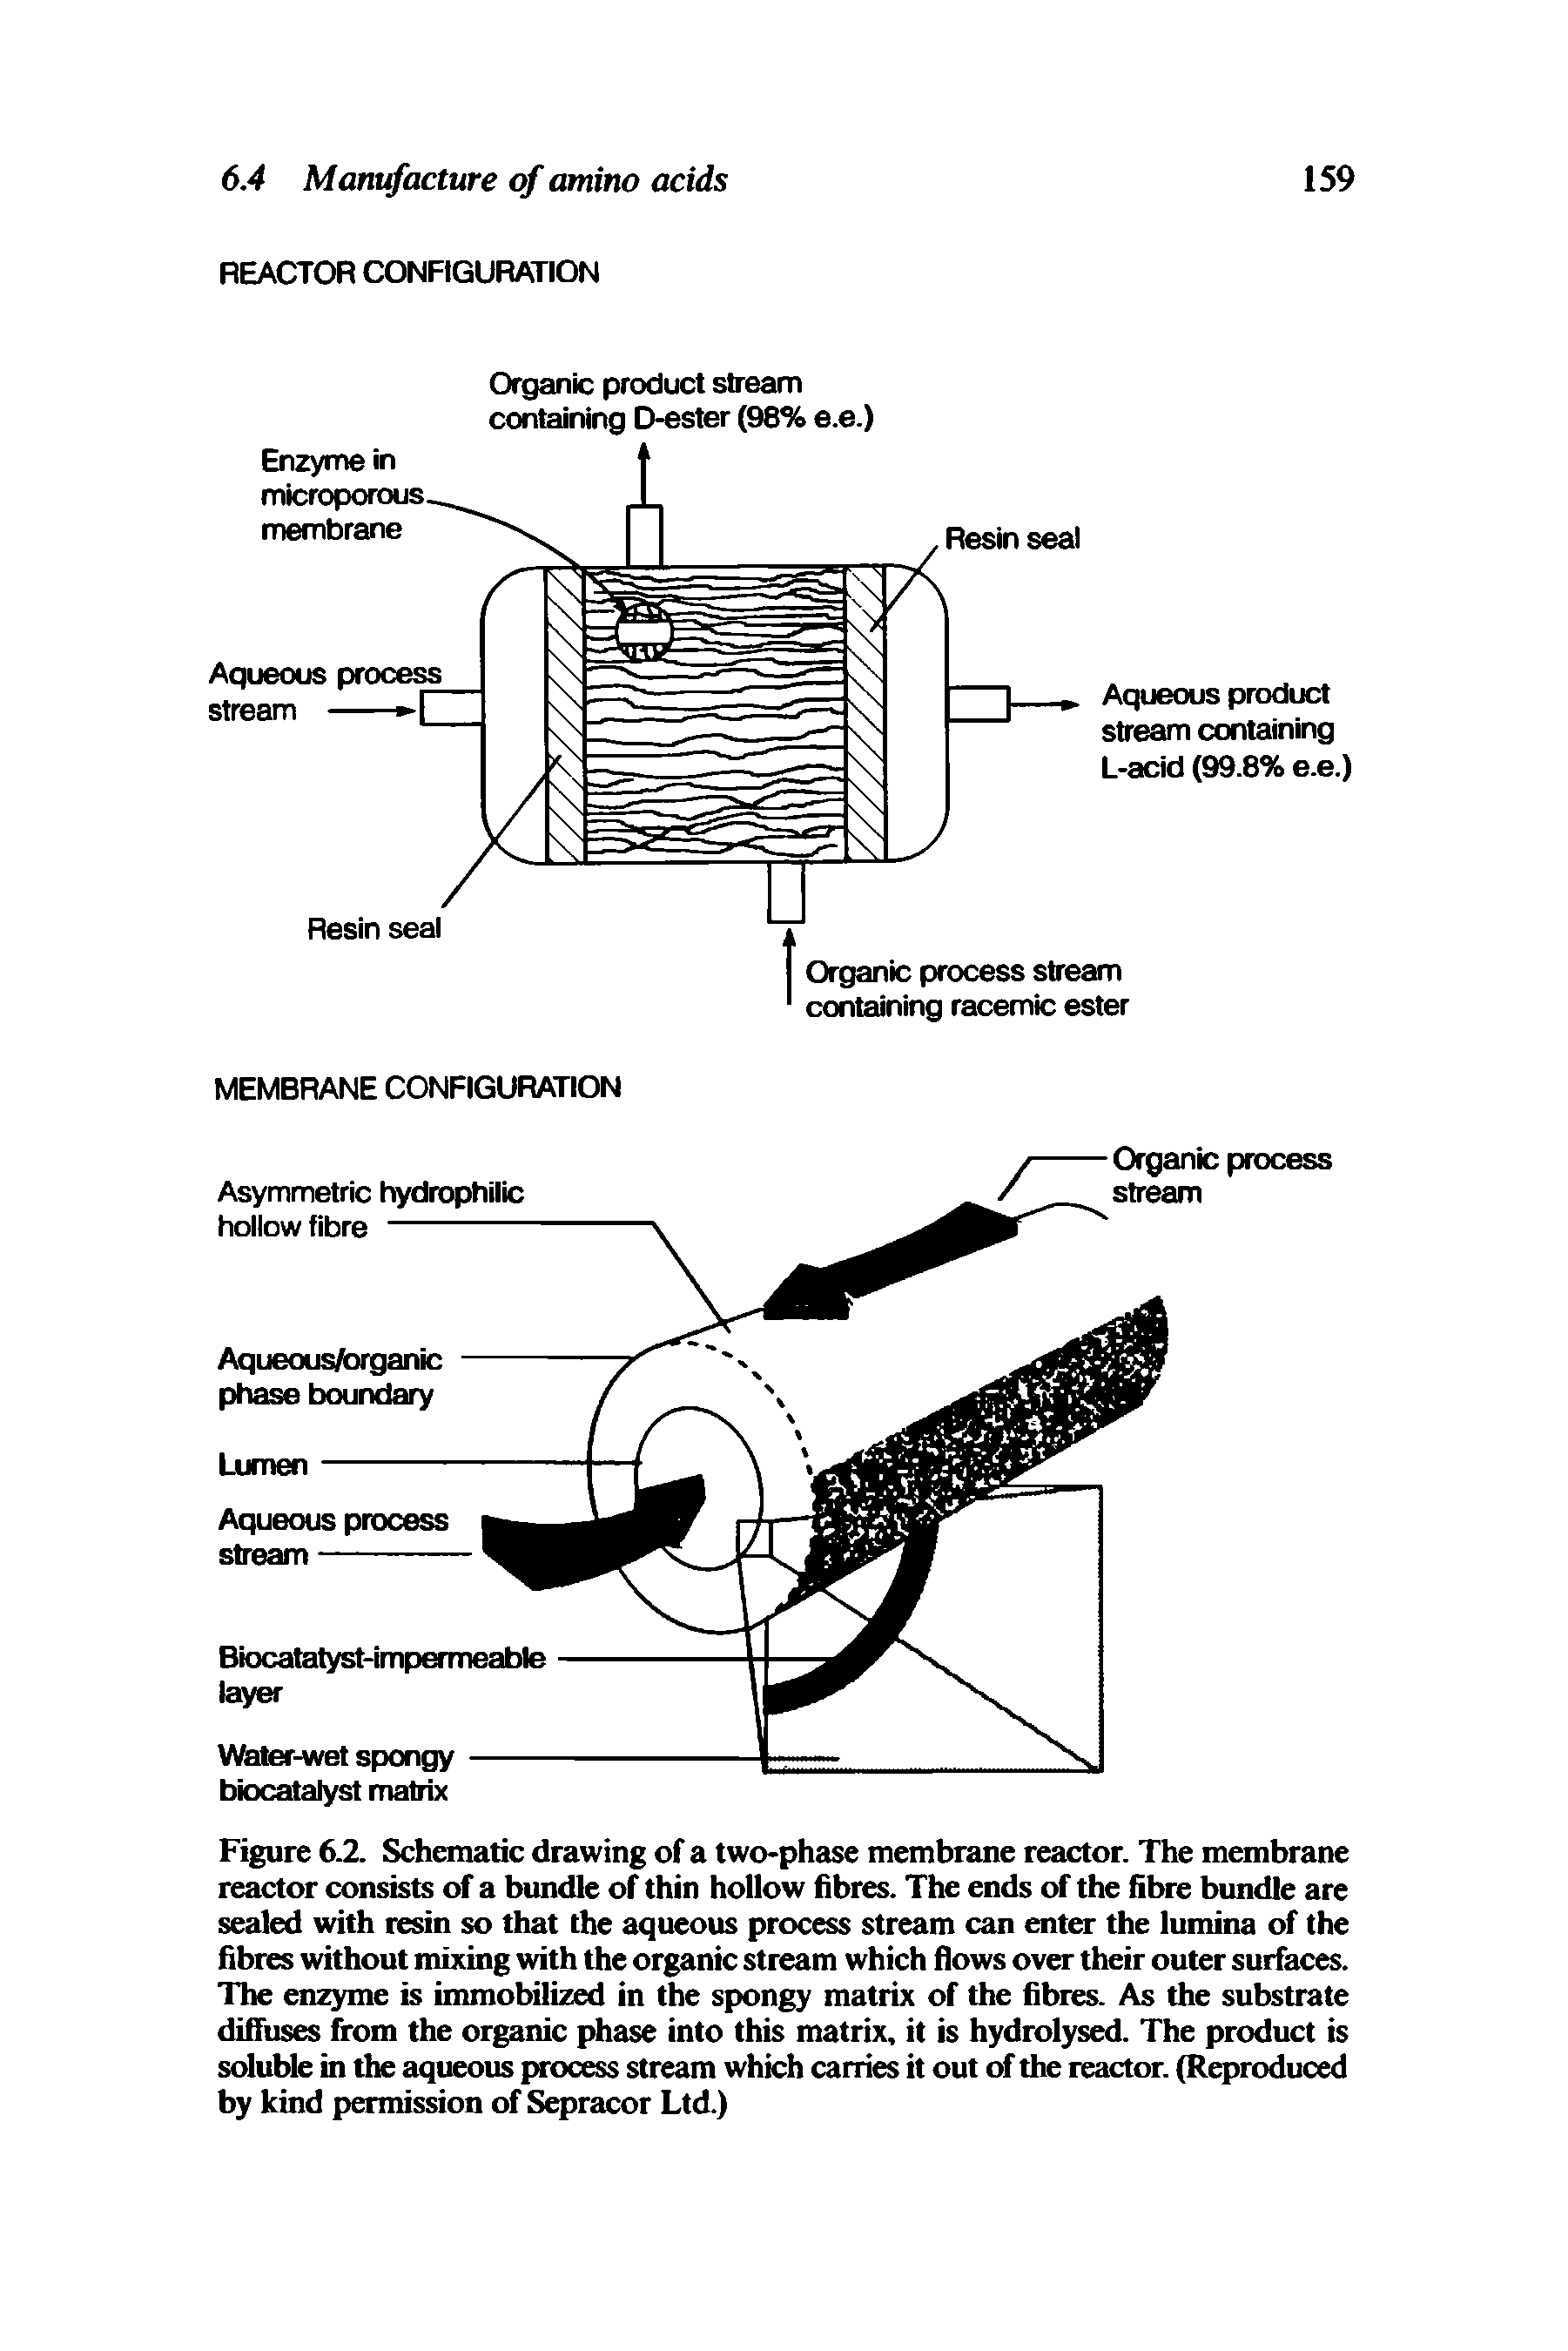 Figure 62. Sdiematic drawing of a two-phase membrane reactor. The membrane reactor consists of a bundle of thin hollow fibres. The ends of the fibre bundle are sealed with resin so that the aqueous process stream can enter the lumina of the fibres without mixing with the organic stream which flows over their outer surfaces. The enzyme is immobilized in the spongy matrix of the fibres. As the substrate difiuses from the organic phase into this matrix, it is hydrolysed. The product is sduble in the aqueous process stream which carries it out of the reactor. (Reproduced by kind permission of Sepracor Ltd.)...